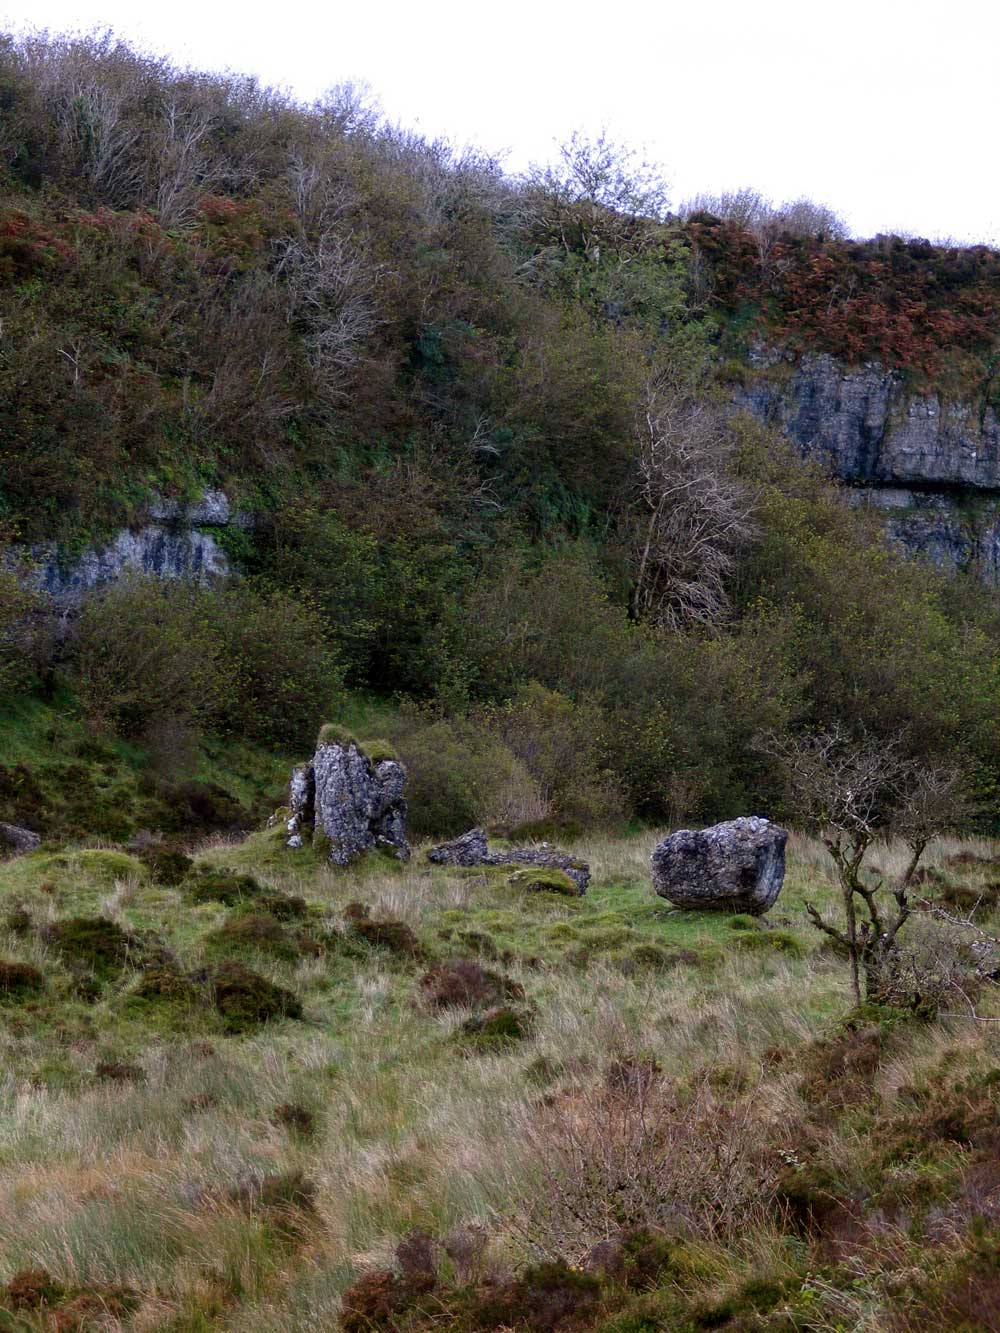 The Stirring Rock and megalithic structure.